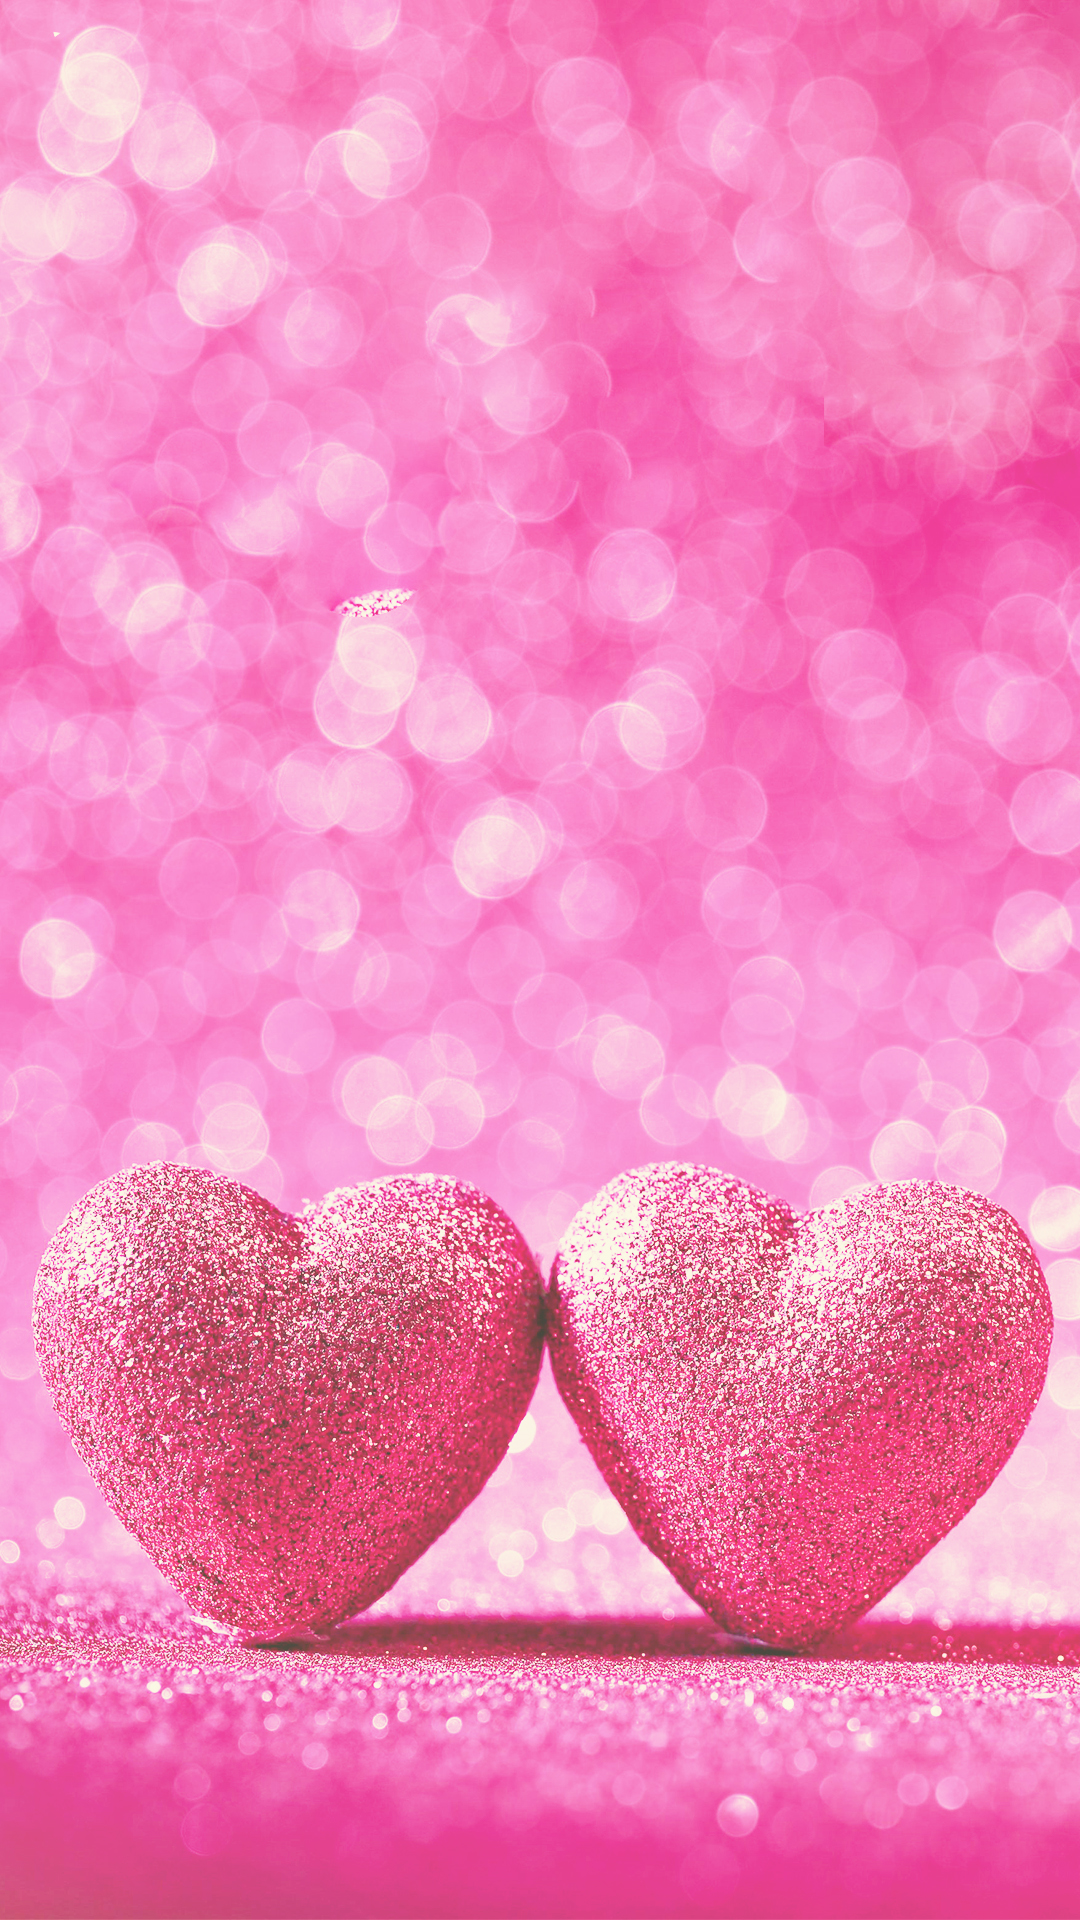 Two Hearts iPhone Wallpaper HD